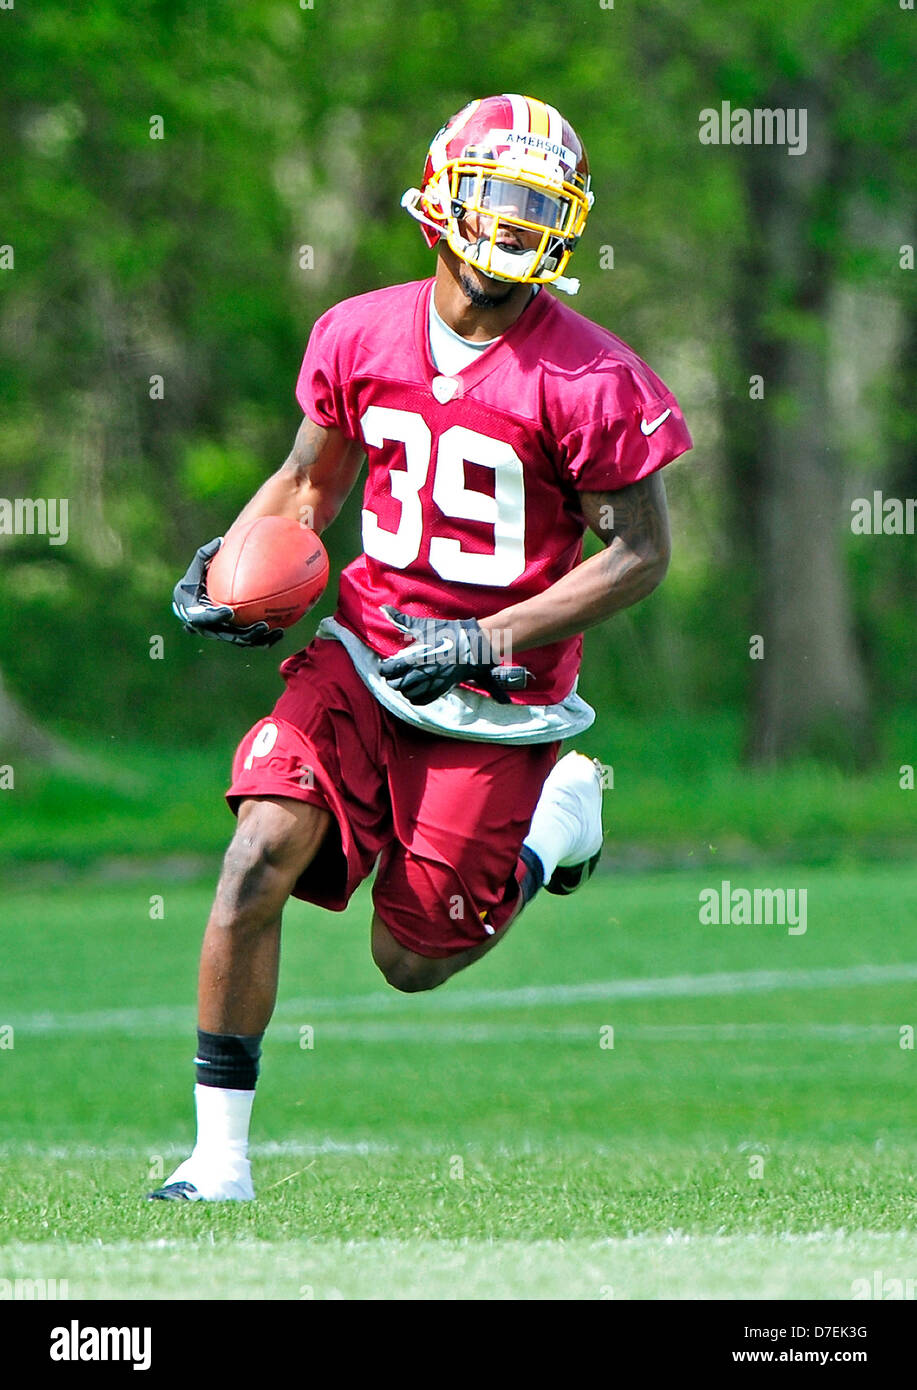 Cornerback David Amerson (39), the Washington Redskins' second round pick out of Georgia in the recent NFL draft, participates in the team's rookie minicamp at Redskins Park in Ashburn, Virginia on Sunday, May 5, 2013..Credit: Ron Sachs / CNP Stock Photo